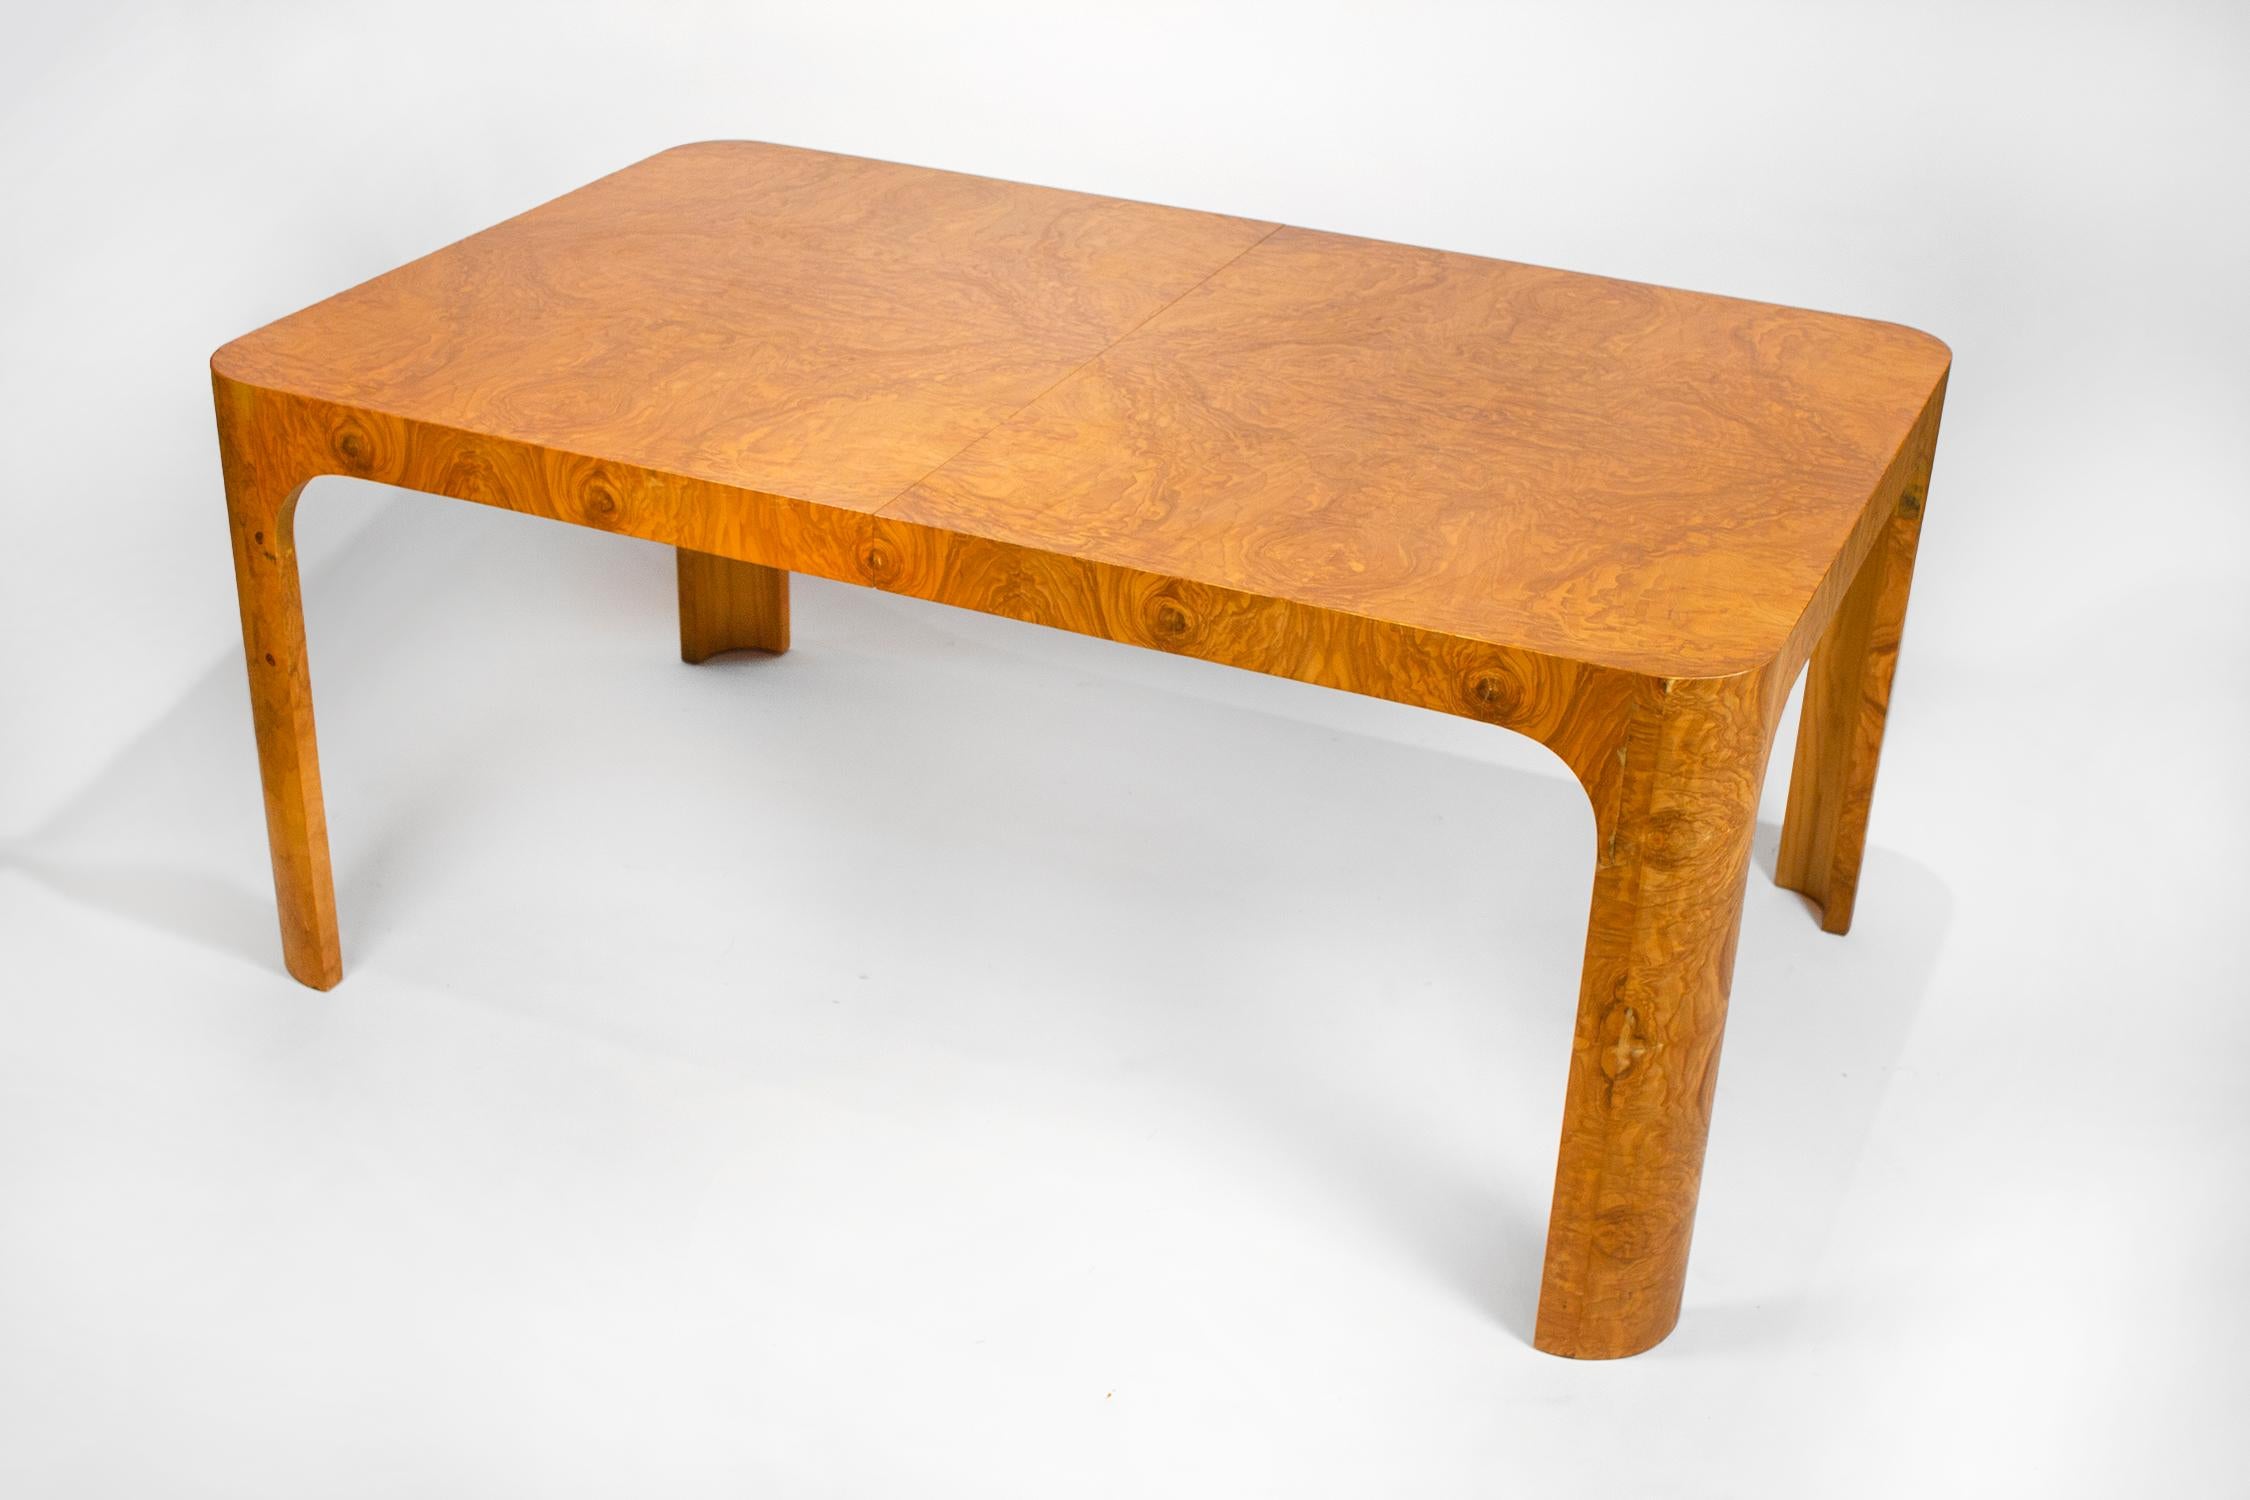 North American Milo Baughman Dining Table for Thayer Coggin in Olive Burl Wood, 1960s